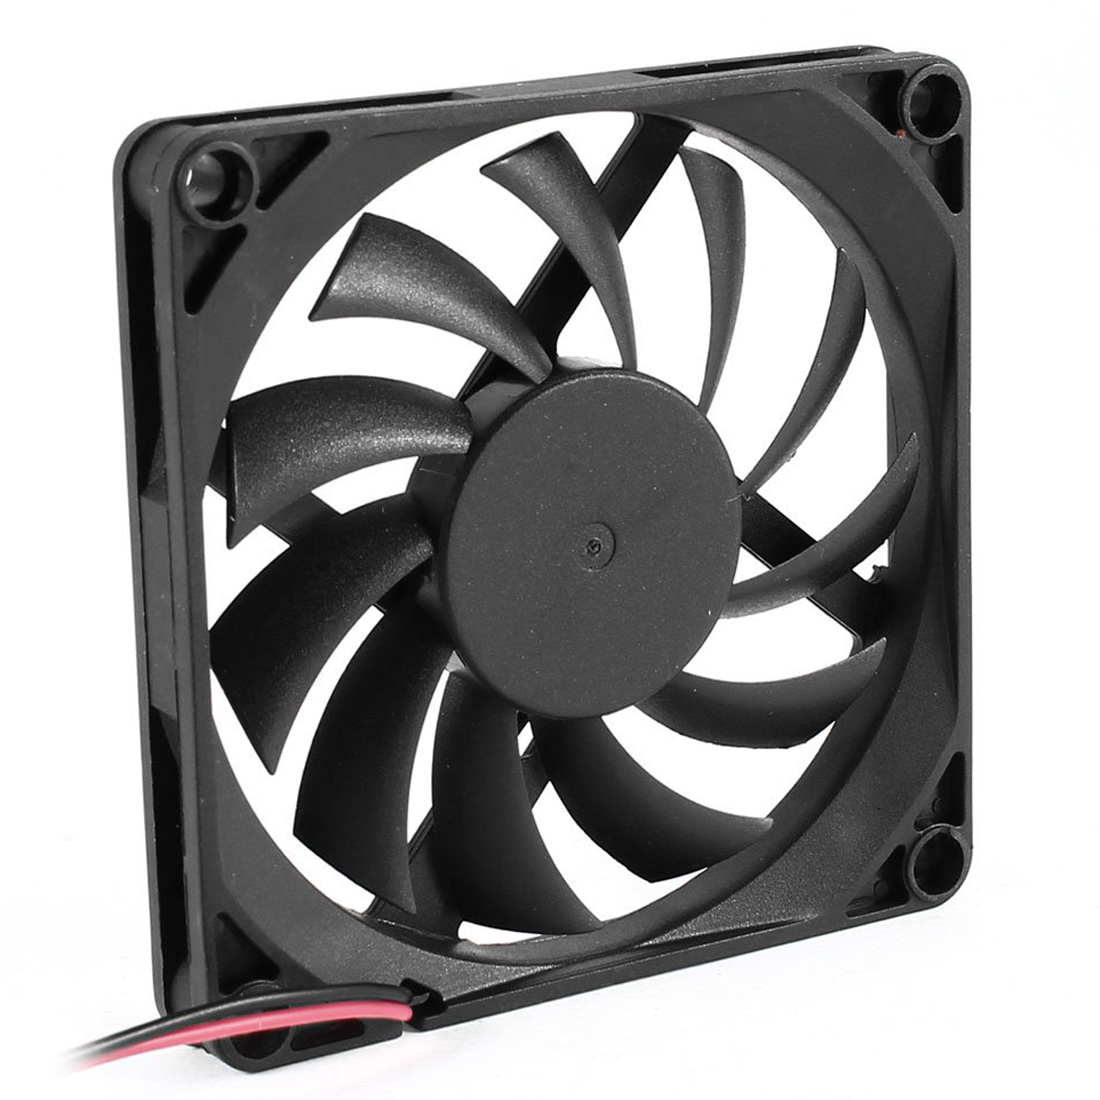 Adroit 12V 2 Pin 40mm Computer Cooler Small Cooling Fan PC Black F Heat Sink MAR26